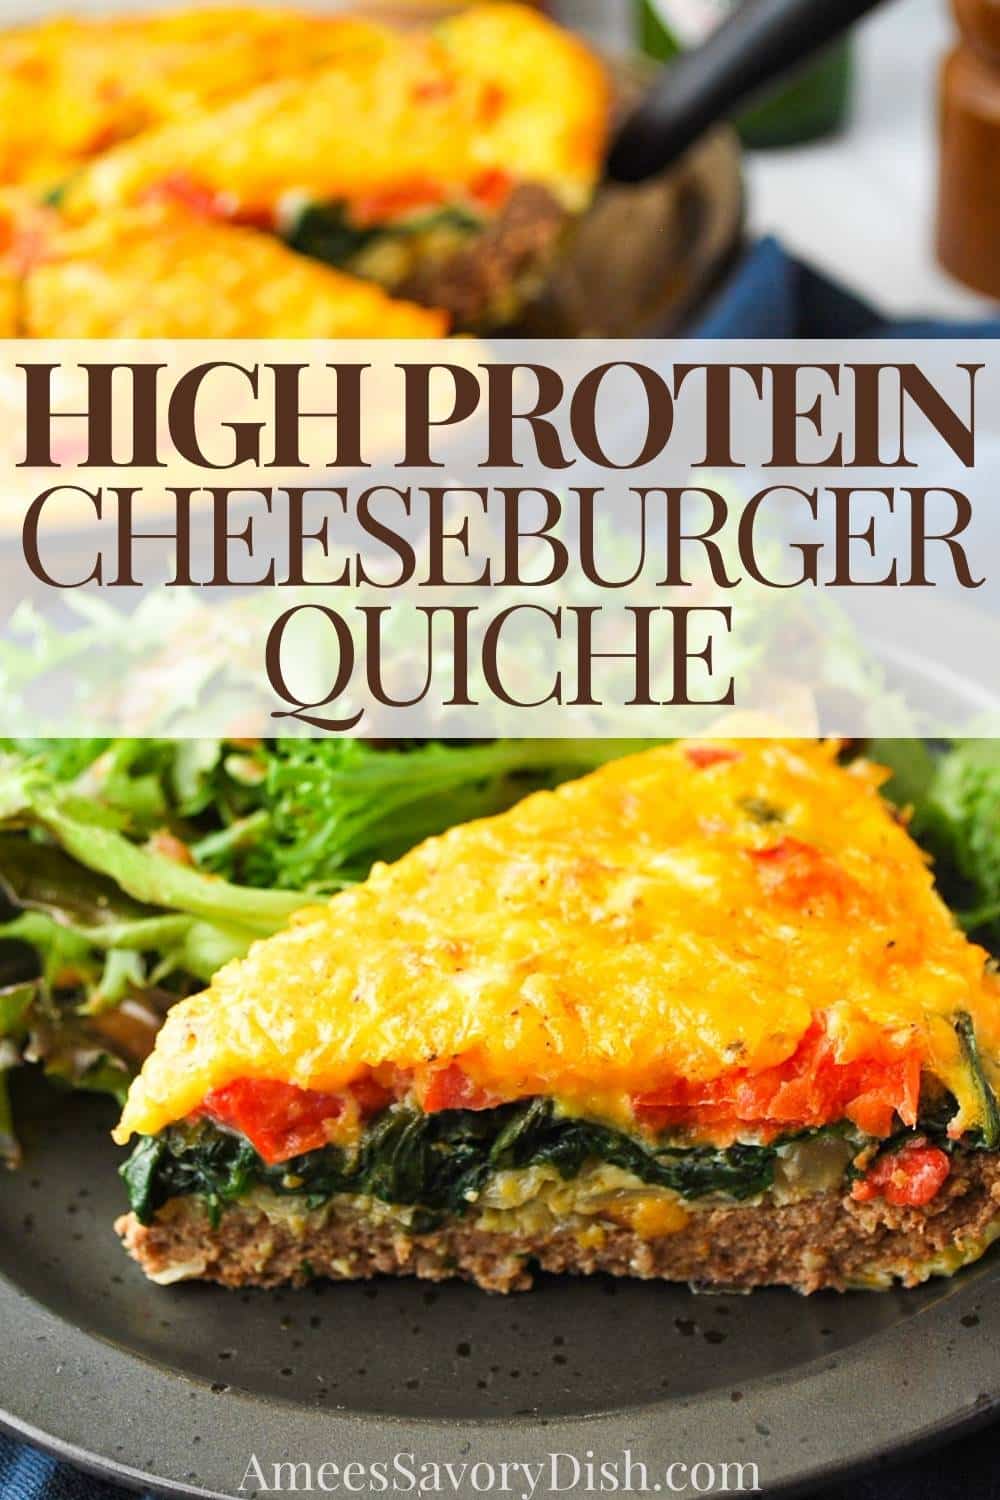 This cheeseburger-inspired High Protein Quiche is a gluten-free, grain-free recipe made with Ground Sirloin Beef, cheddar cheese, baby spinach, and tomatoes. via @Ameessavorydish